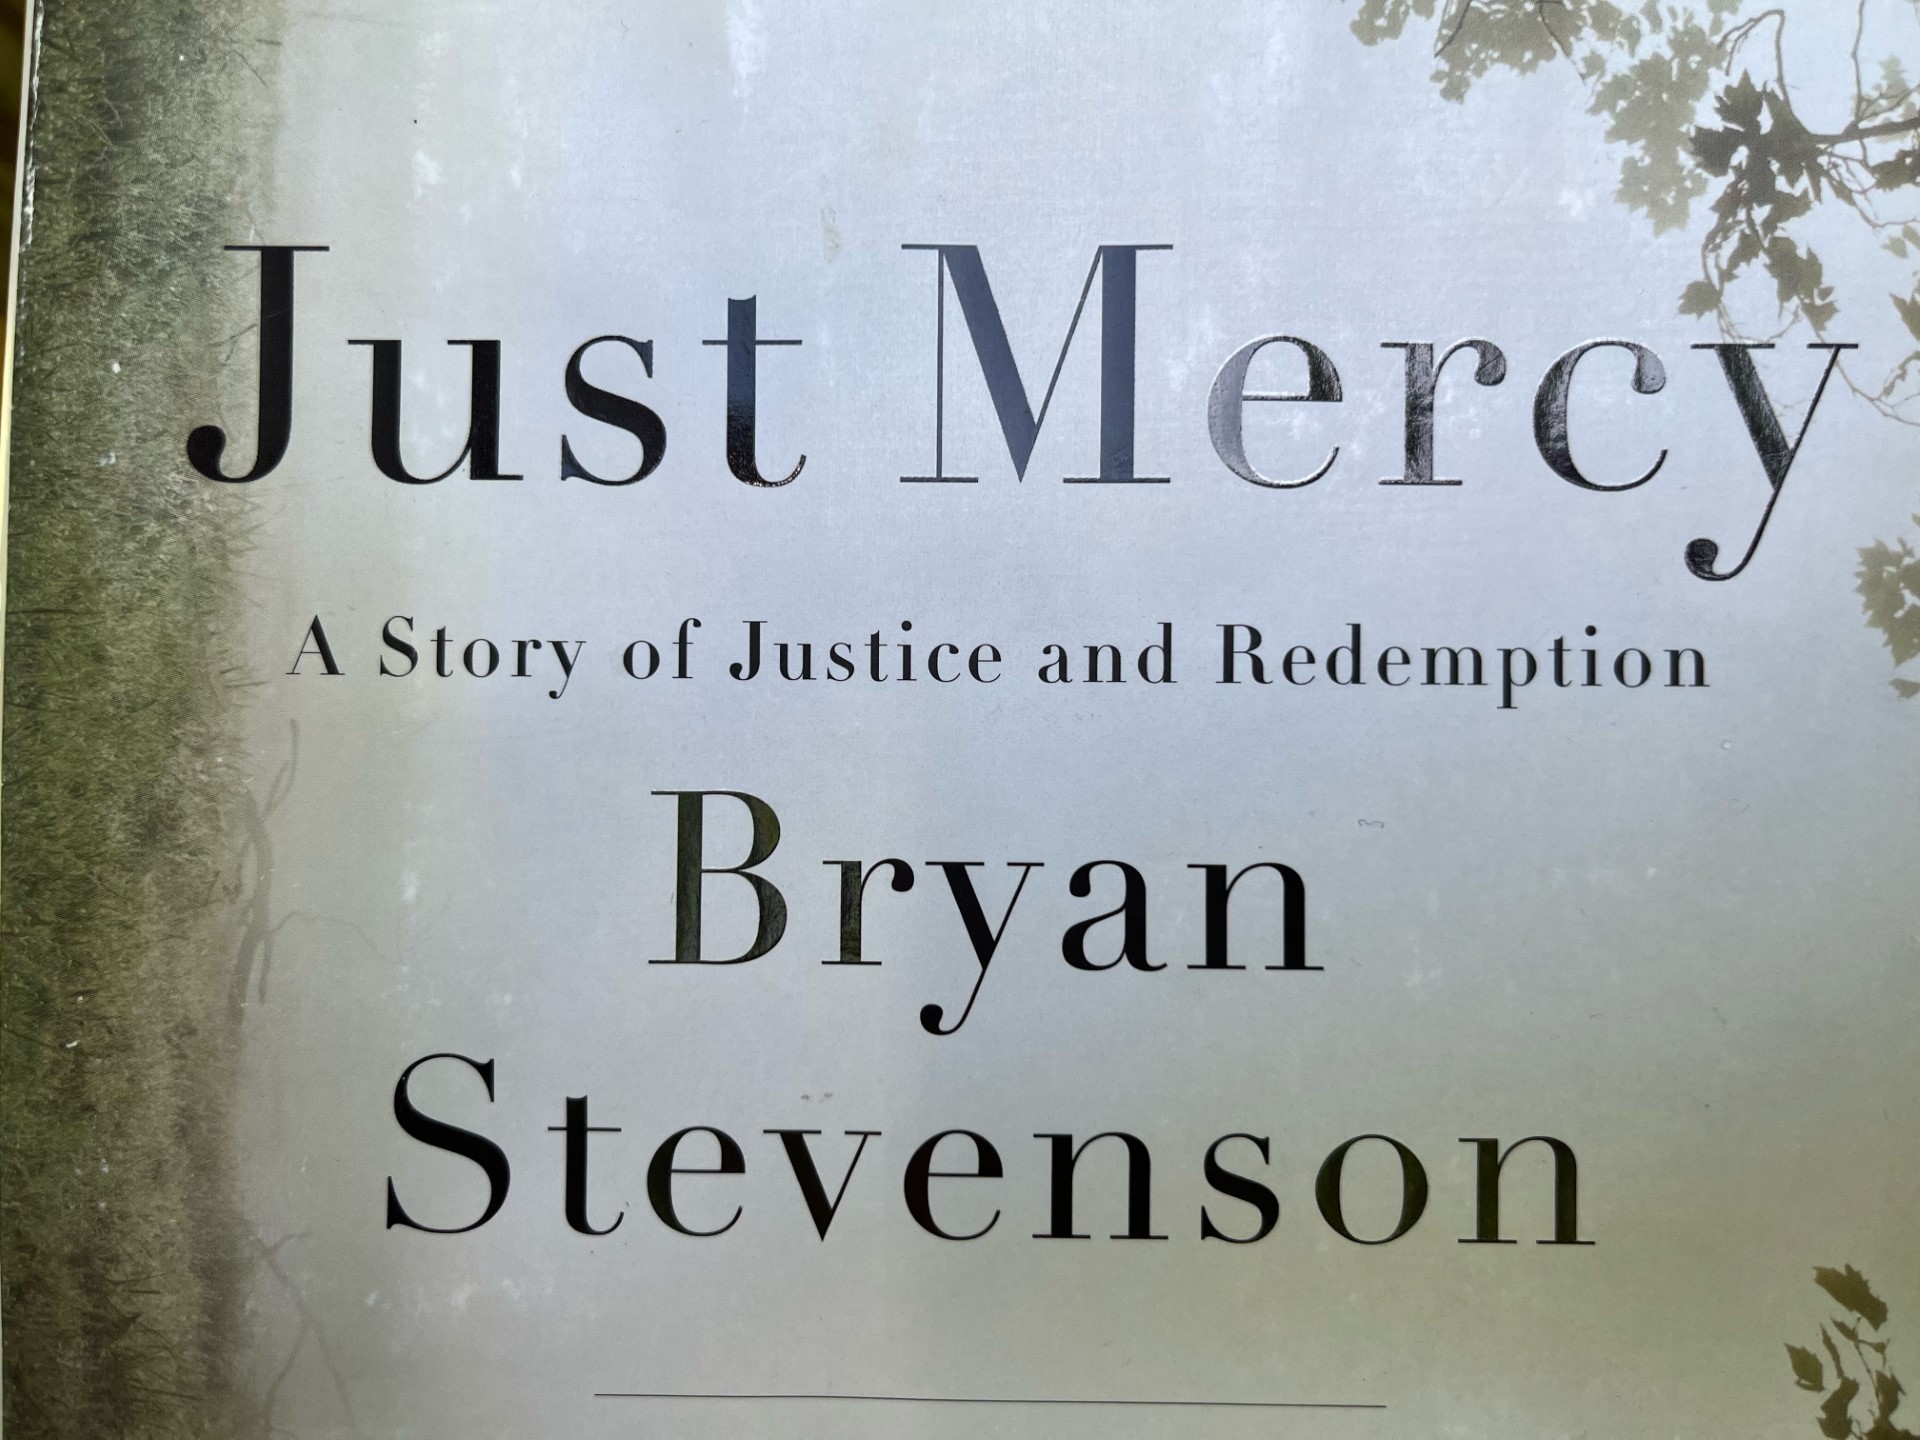 May Book of the Month: Just Mercy